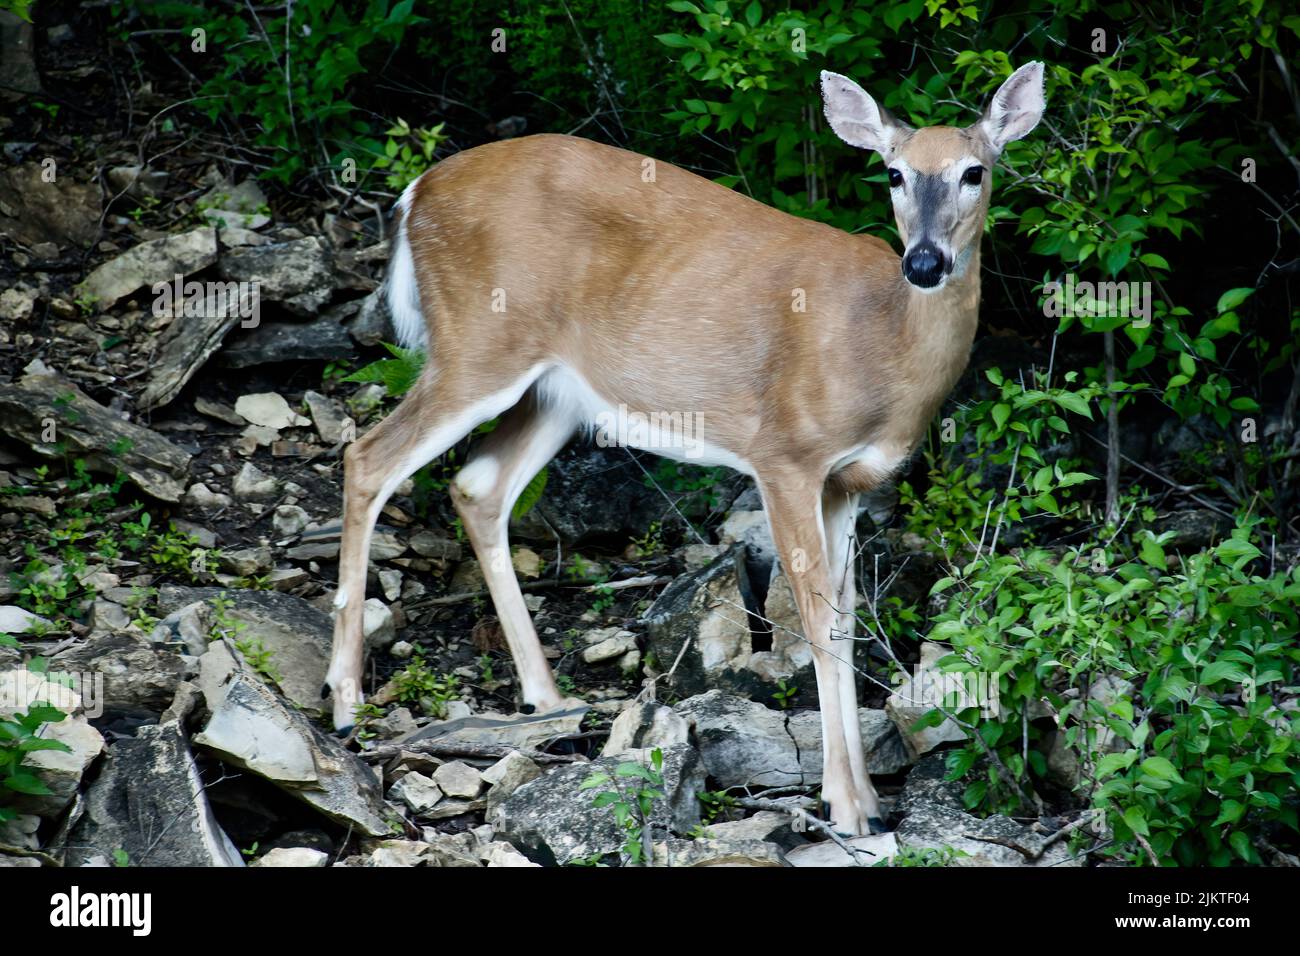 A young deer in a forest Stock Photo